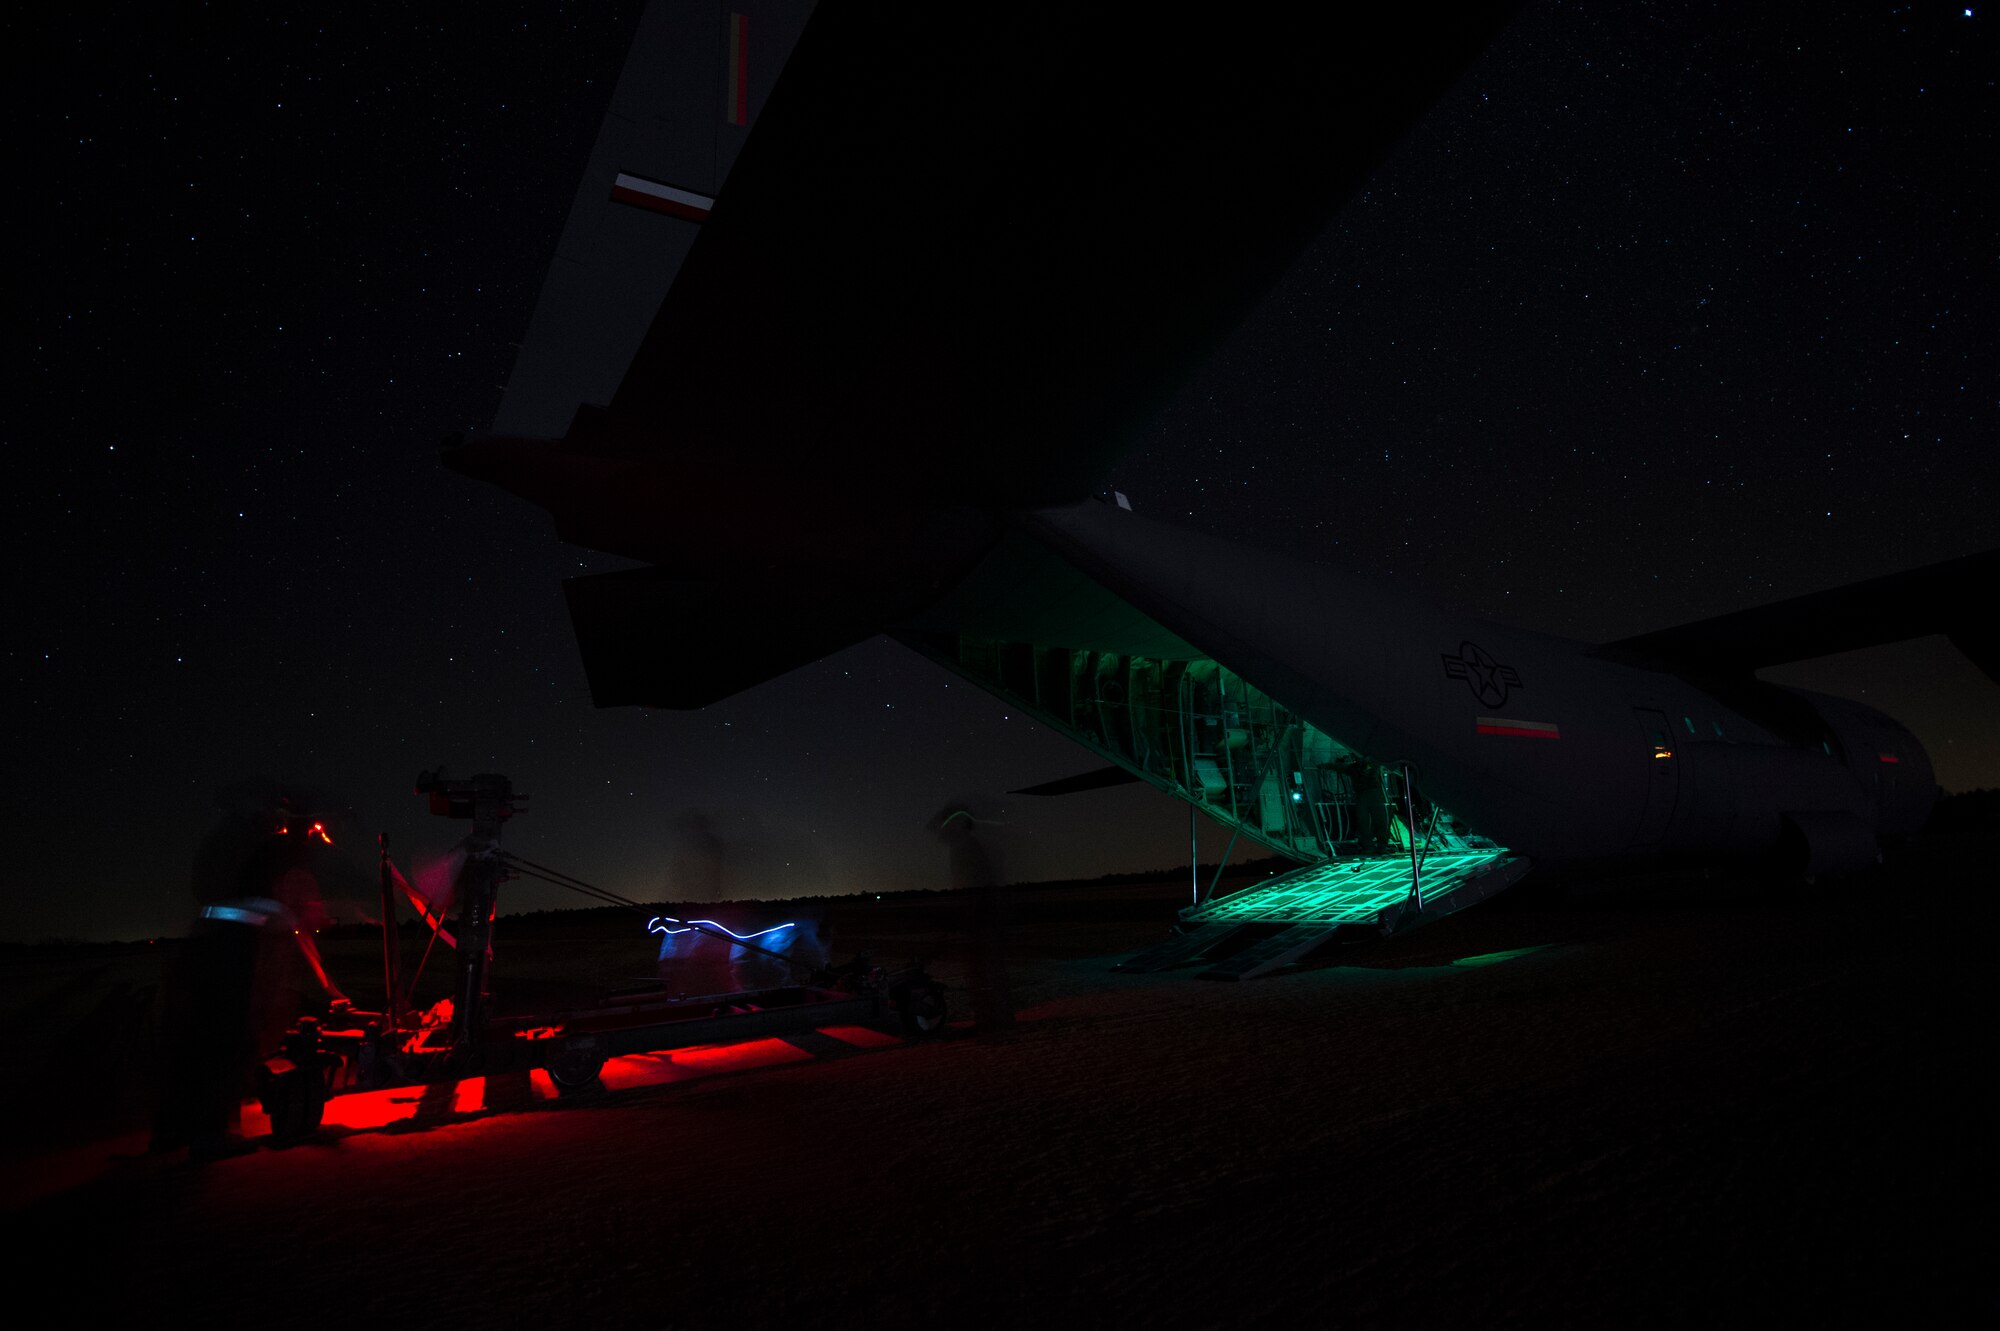 Members of the 817th Contingency Response Group train at night using night vision goggles at the Joint Readiness Training Center exercise at Ft. Polk, La., Jan. 18, 2015. JRTC is a 34th Combat Training Squadron exercise for the U.S. Army that improves unit readiness by providing realistic, stressful, joint and combined arms training across the full spectrum of conflict. The Airmen helped support the exercise, and also provided an opportunity for internal training. (U.S. Air Force photo/Staff Sgt. Gustavo Gonzalez/RELEASED)